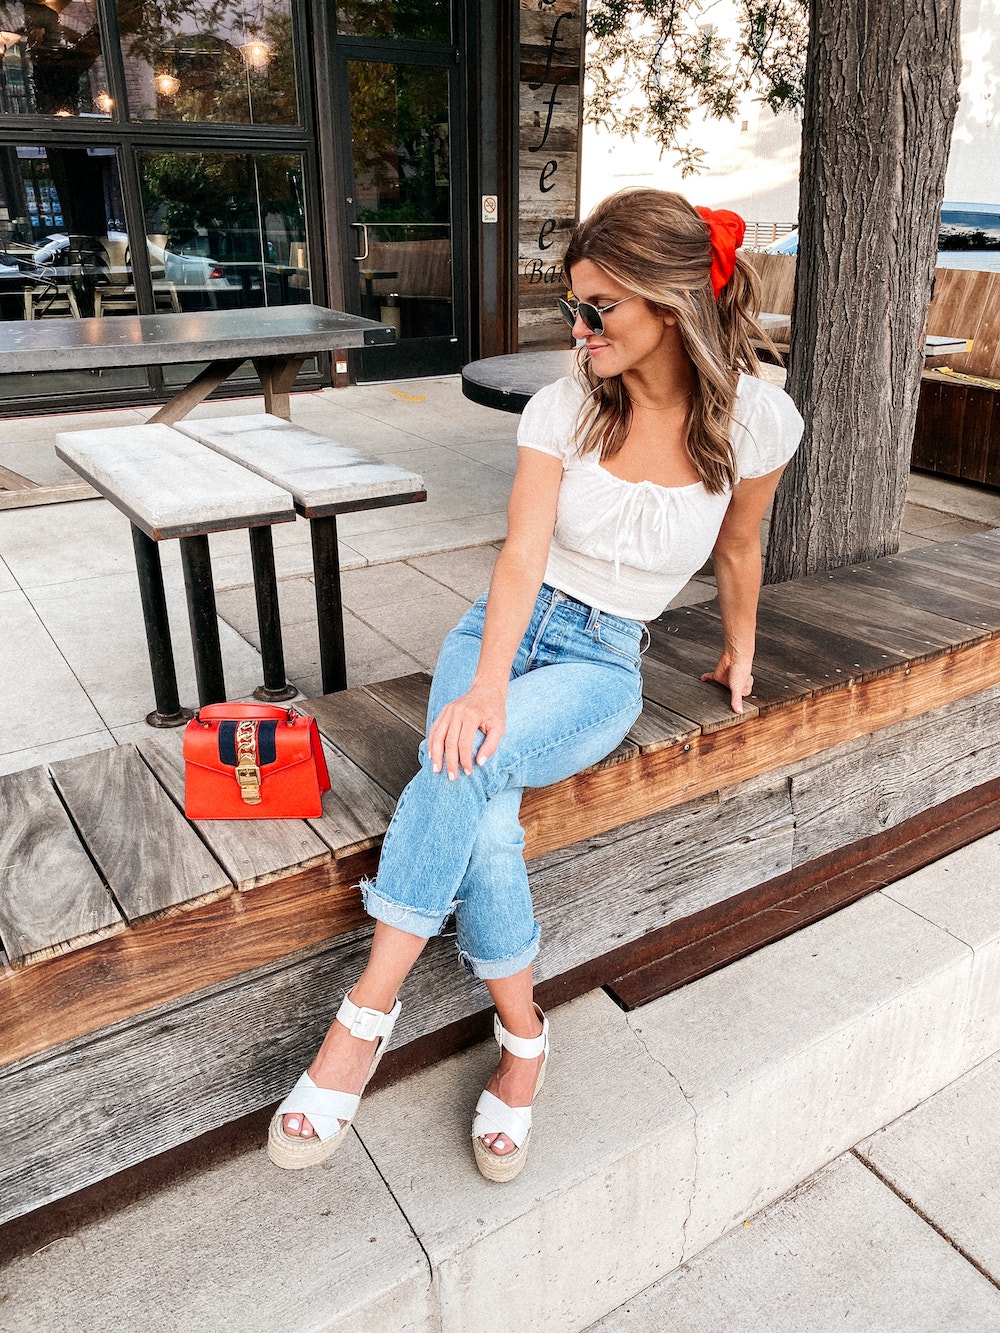 fourth of July outfit idea, white top with Levis wedgie jeans with platform sandals